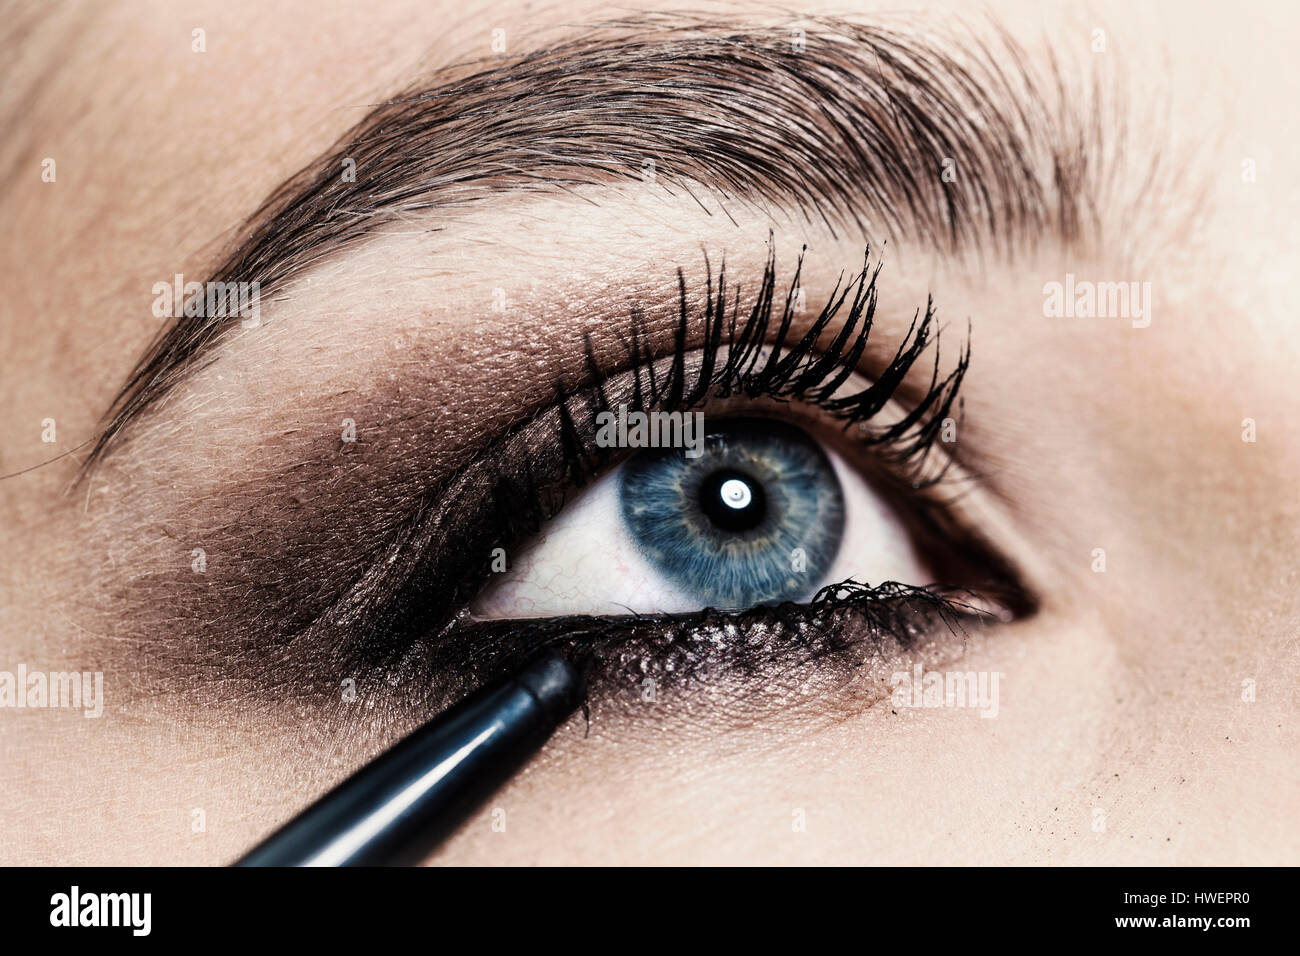 Close up of eyeliner being applied to young woman's eye Stock Photo